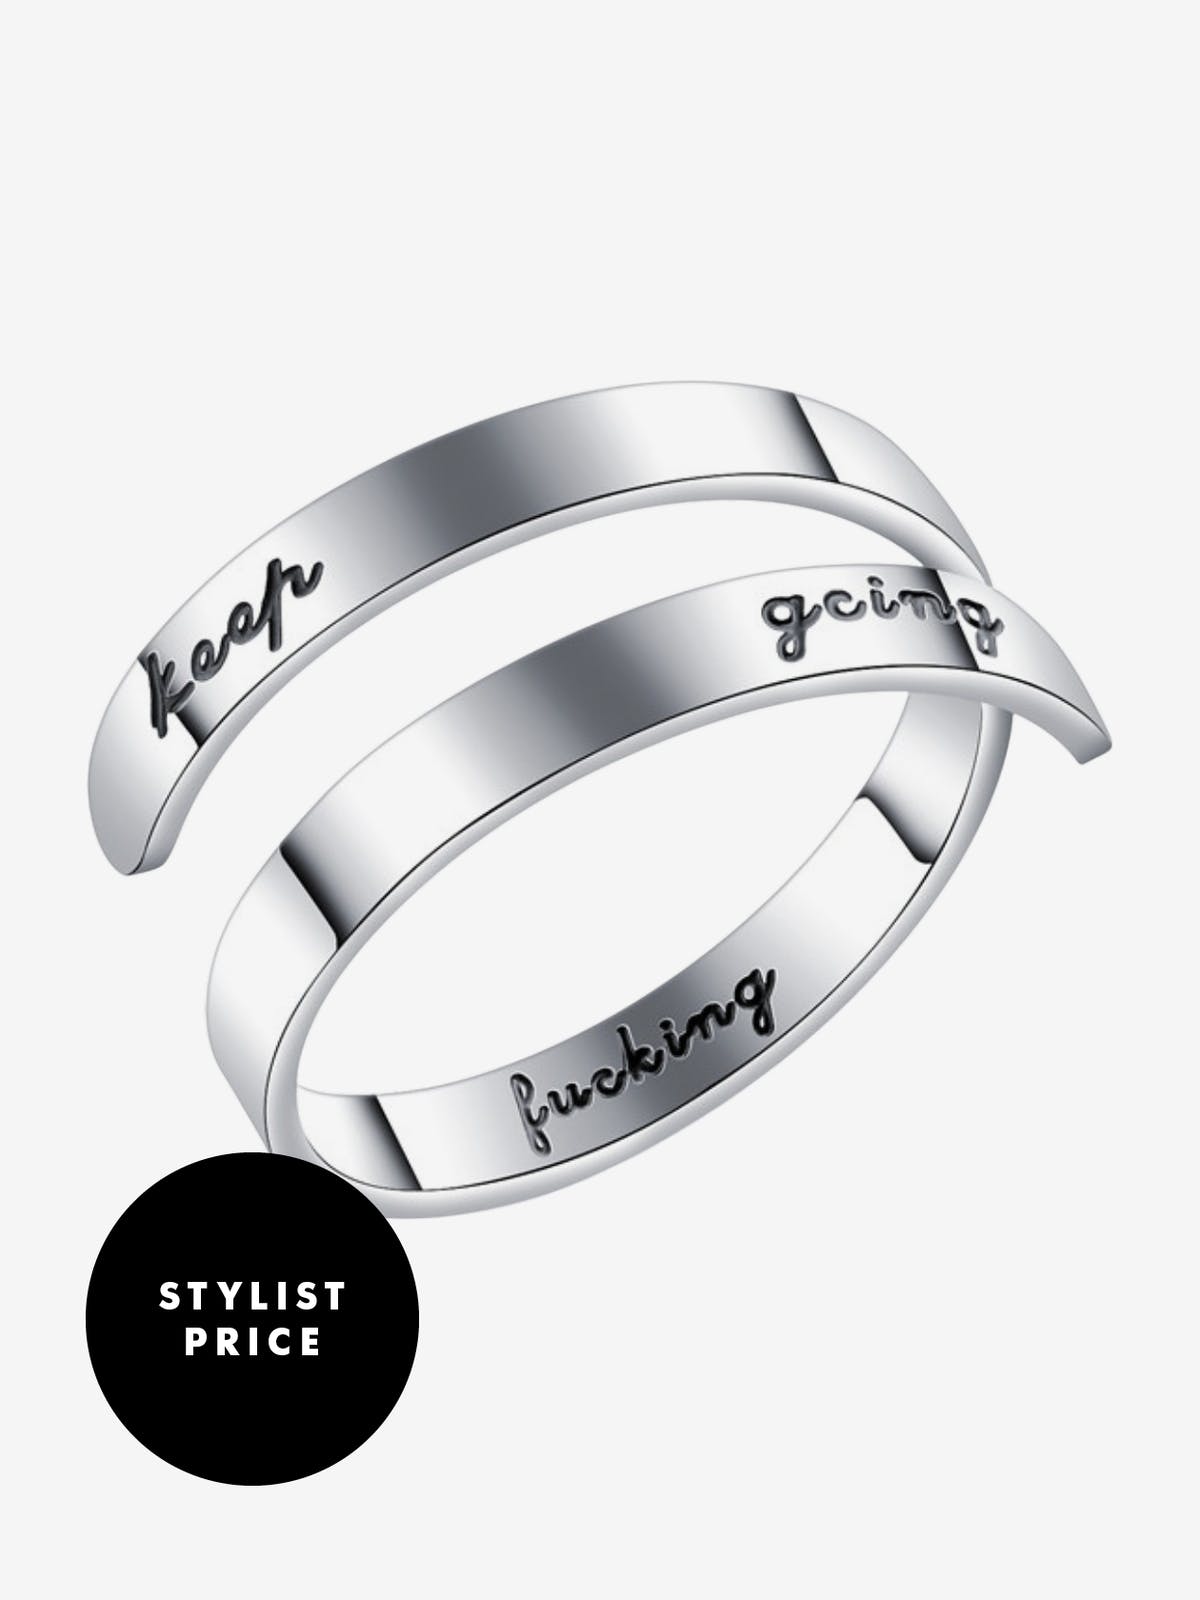 8 chic rings to add to your jewellery collection from great indie brands